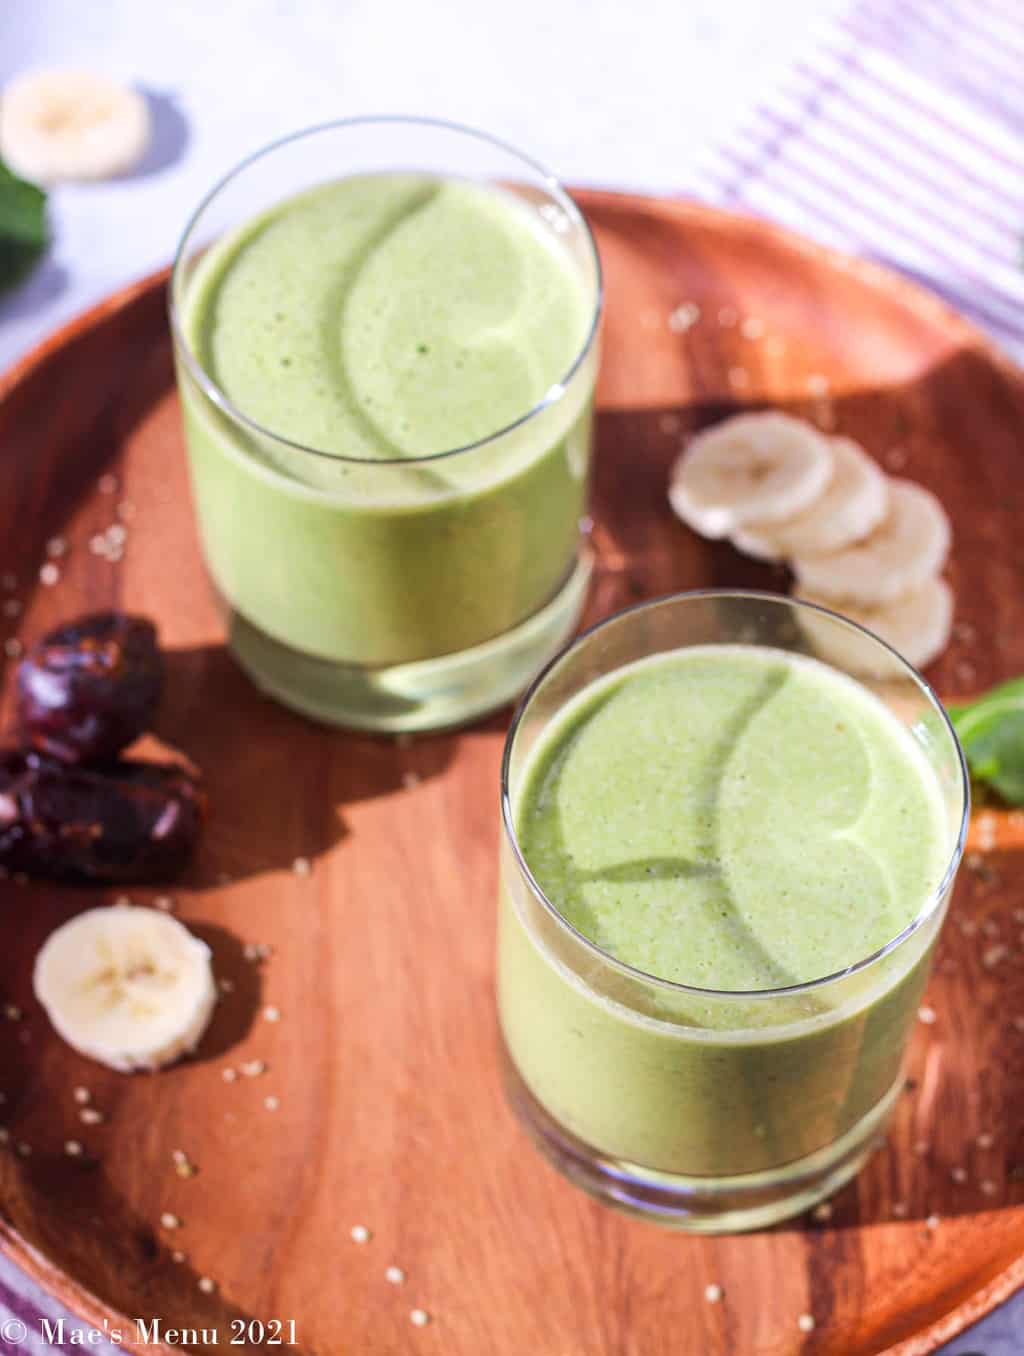 An overhead angled shot of two glasses of green peanut butter date smoothies